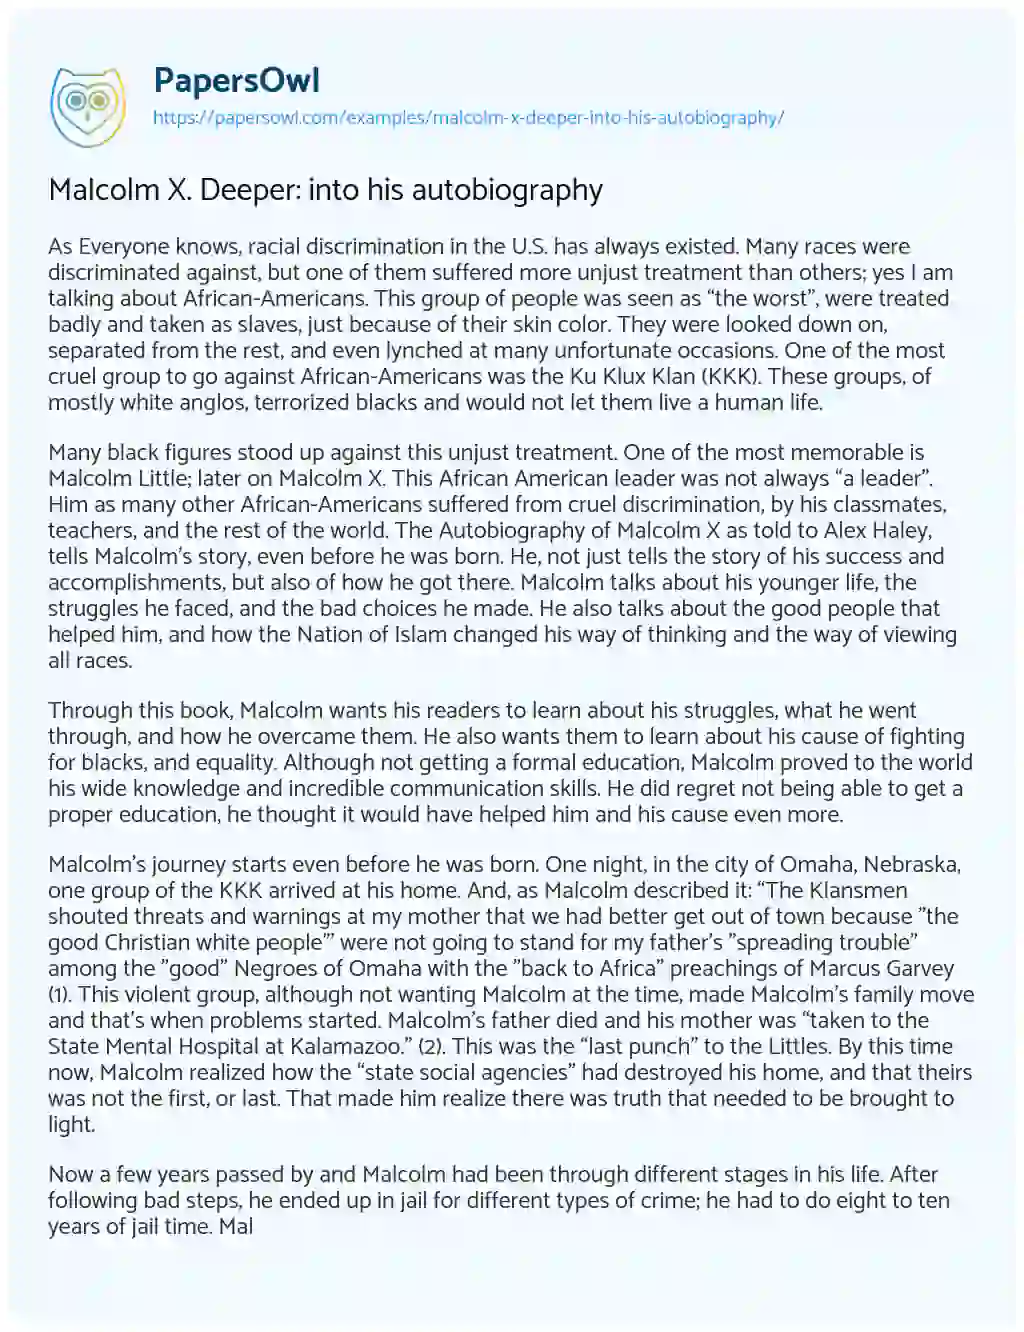 Essay on Malcolm X. Deeper: into his Autobiography